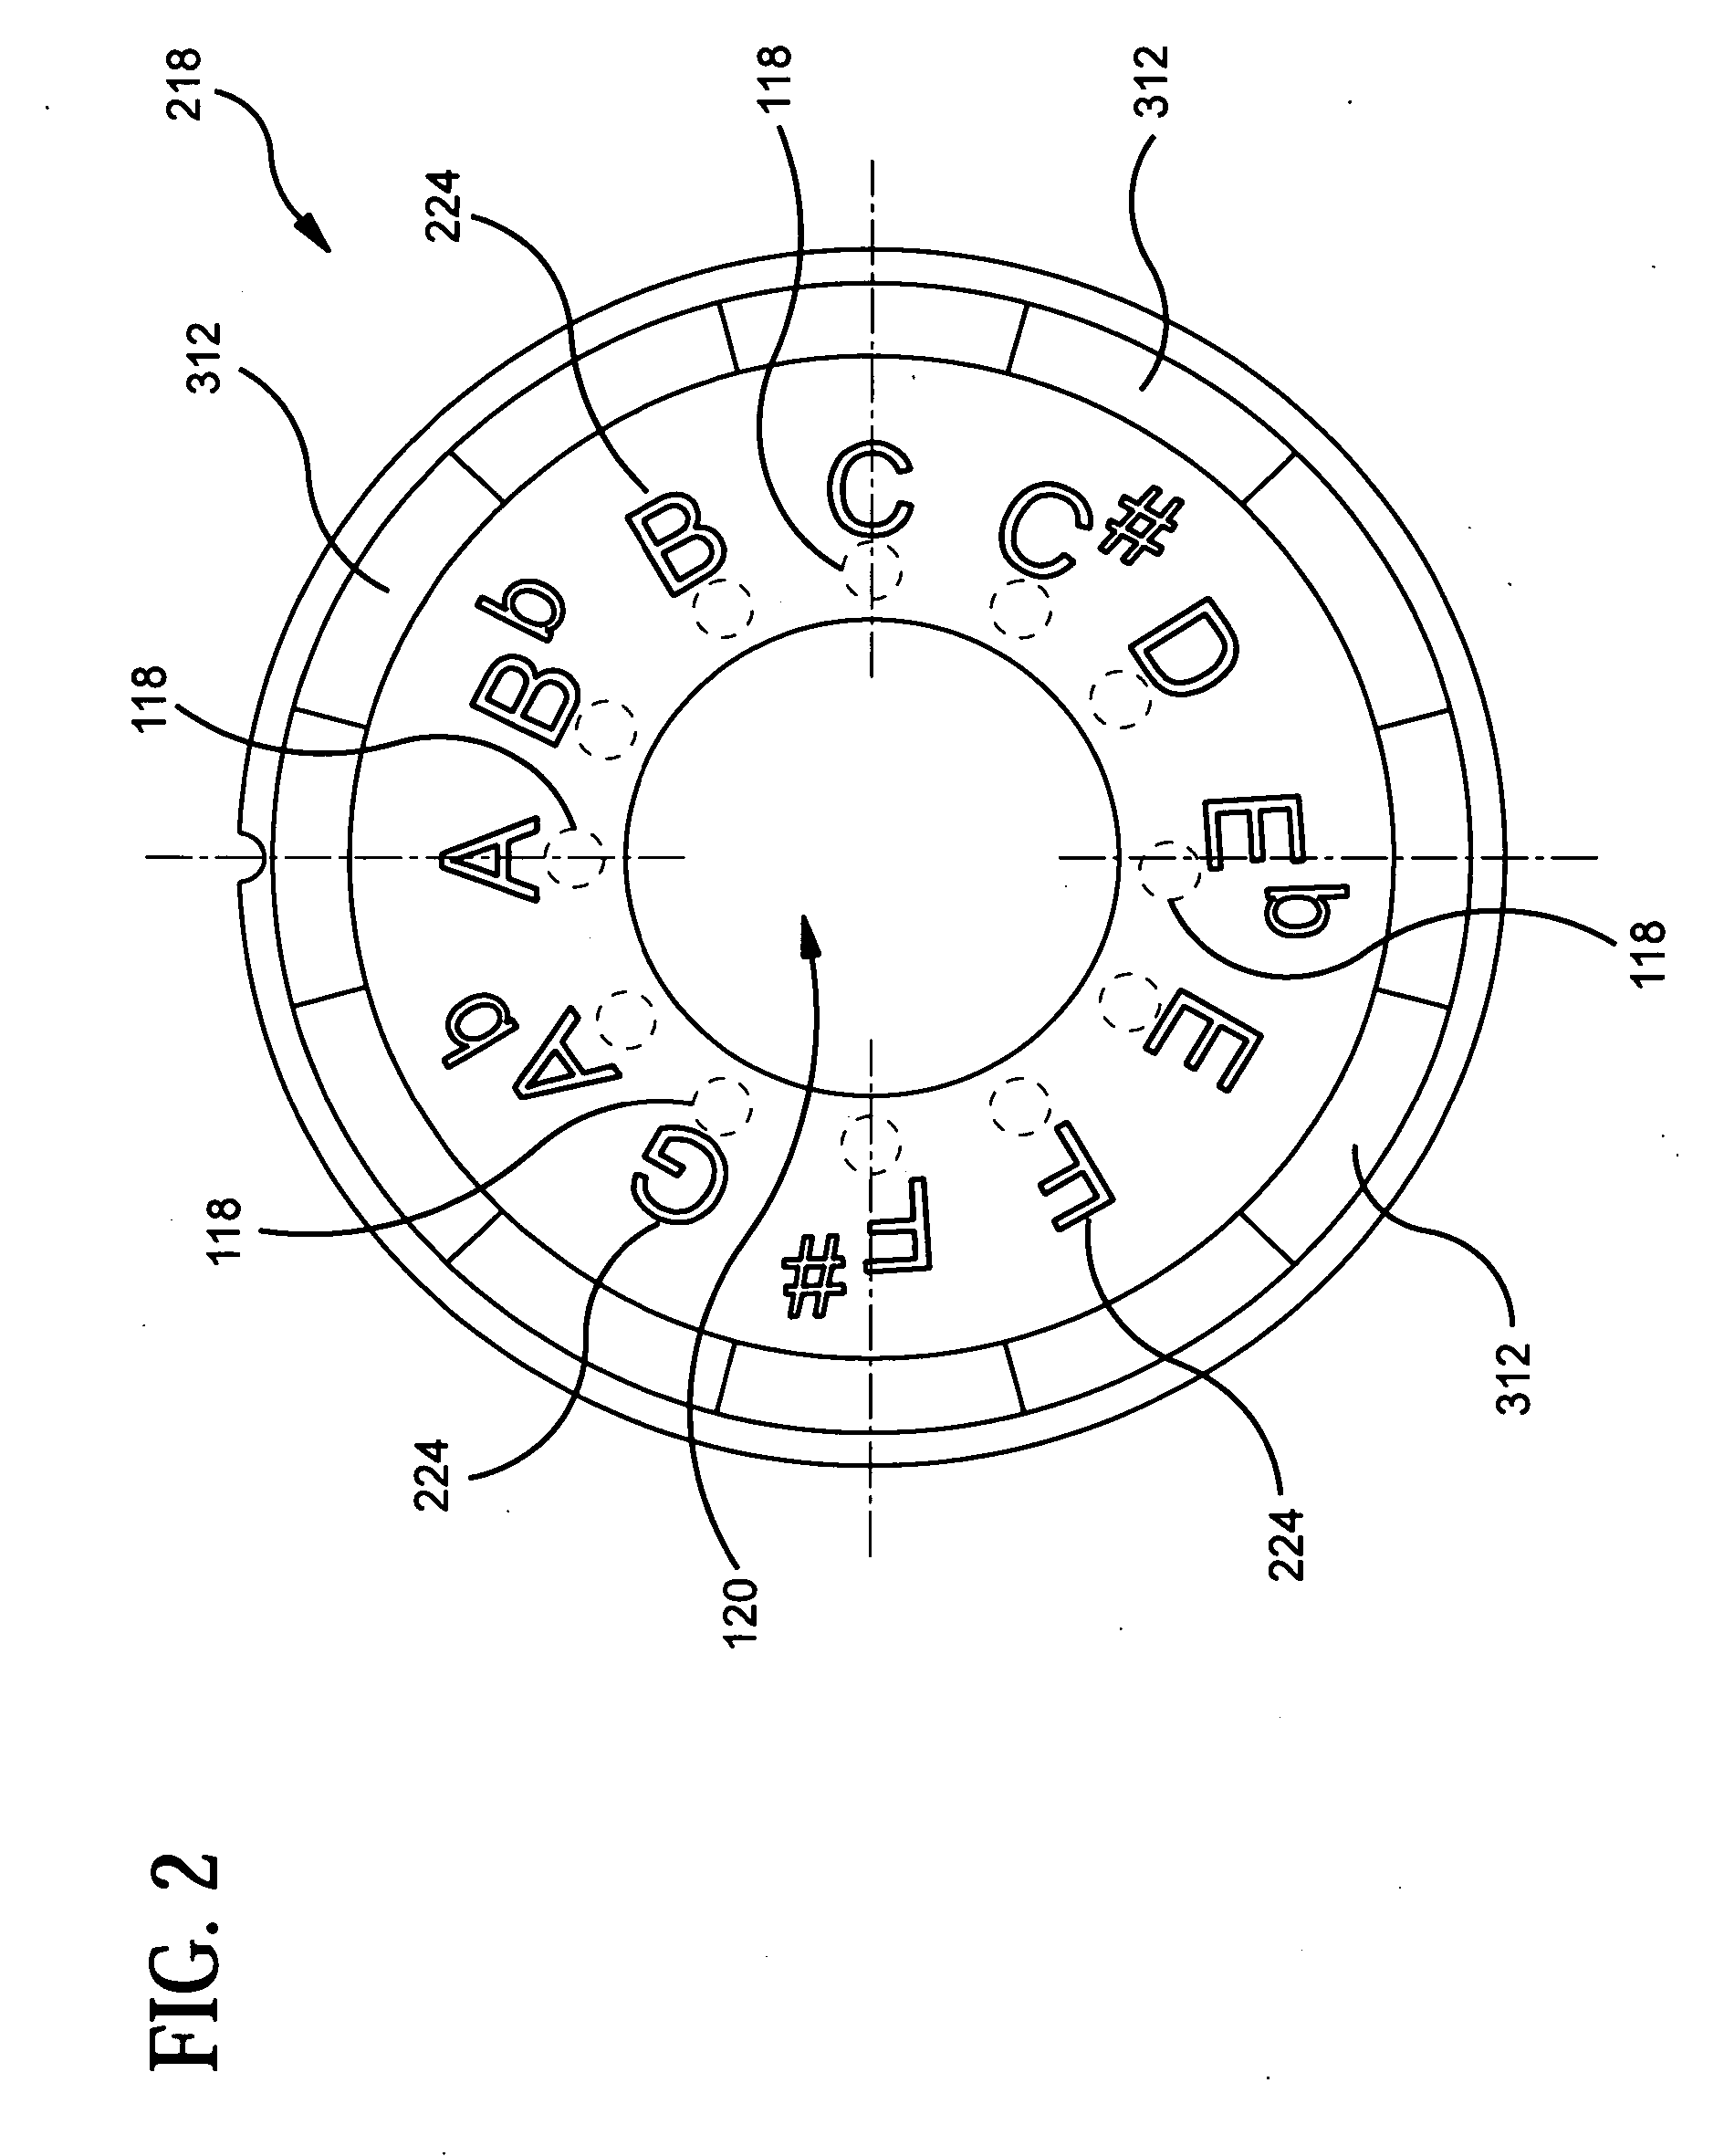 Optical display interface for electronic tuner for musical instruments